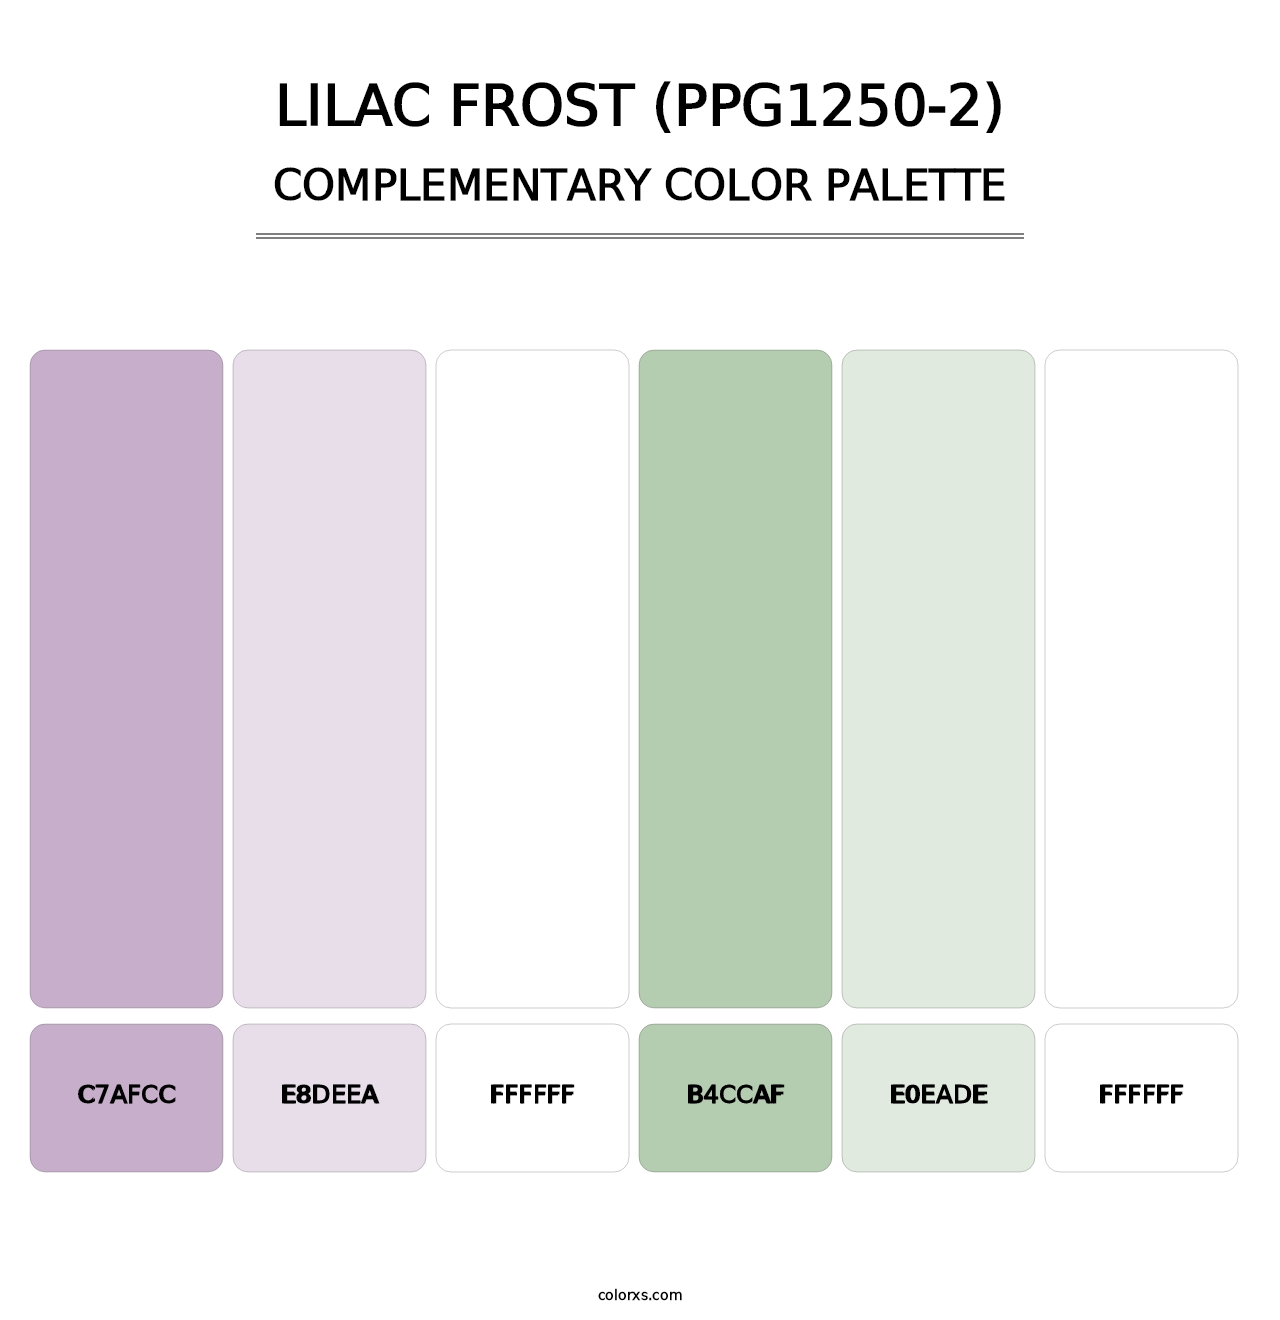 Lilac Frost (PPG1250-2) - Complementary Color Palette